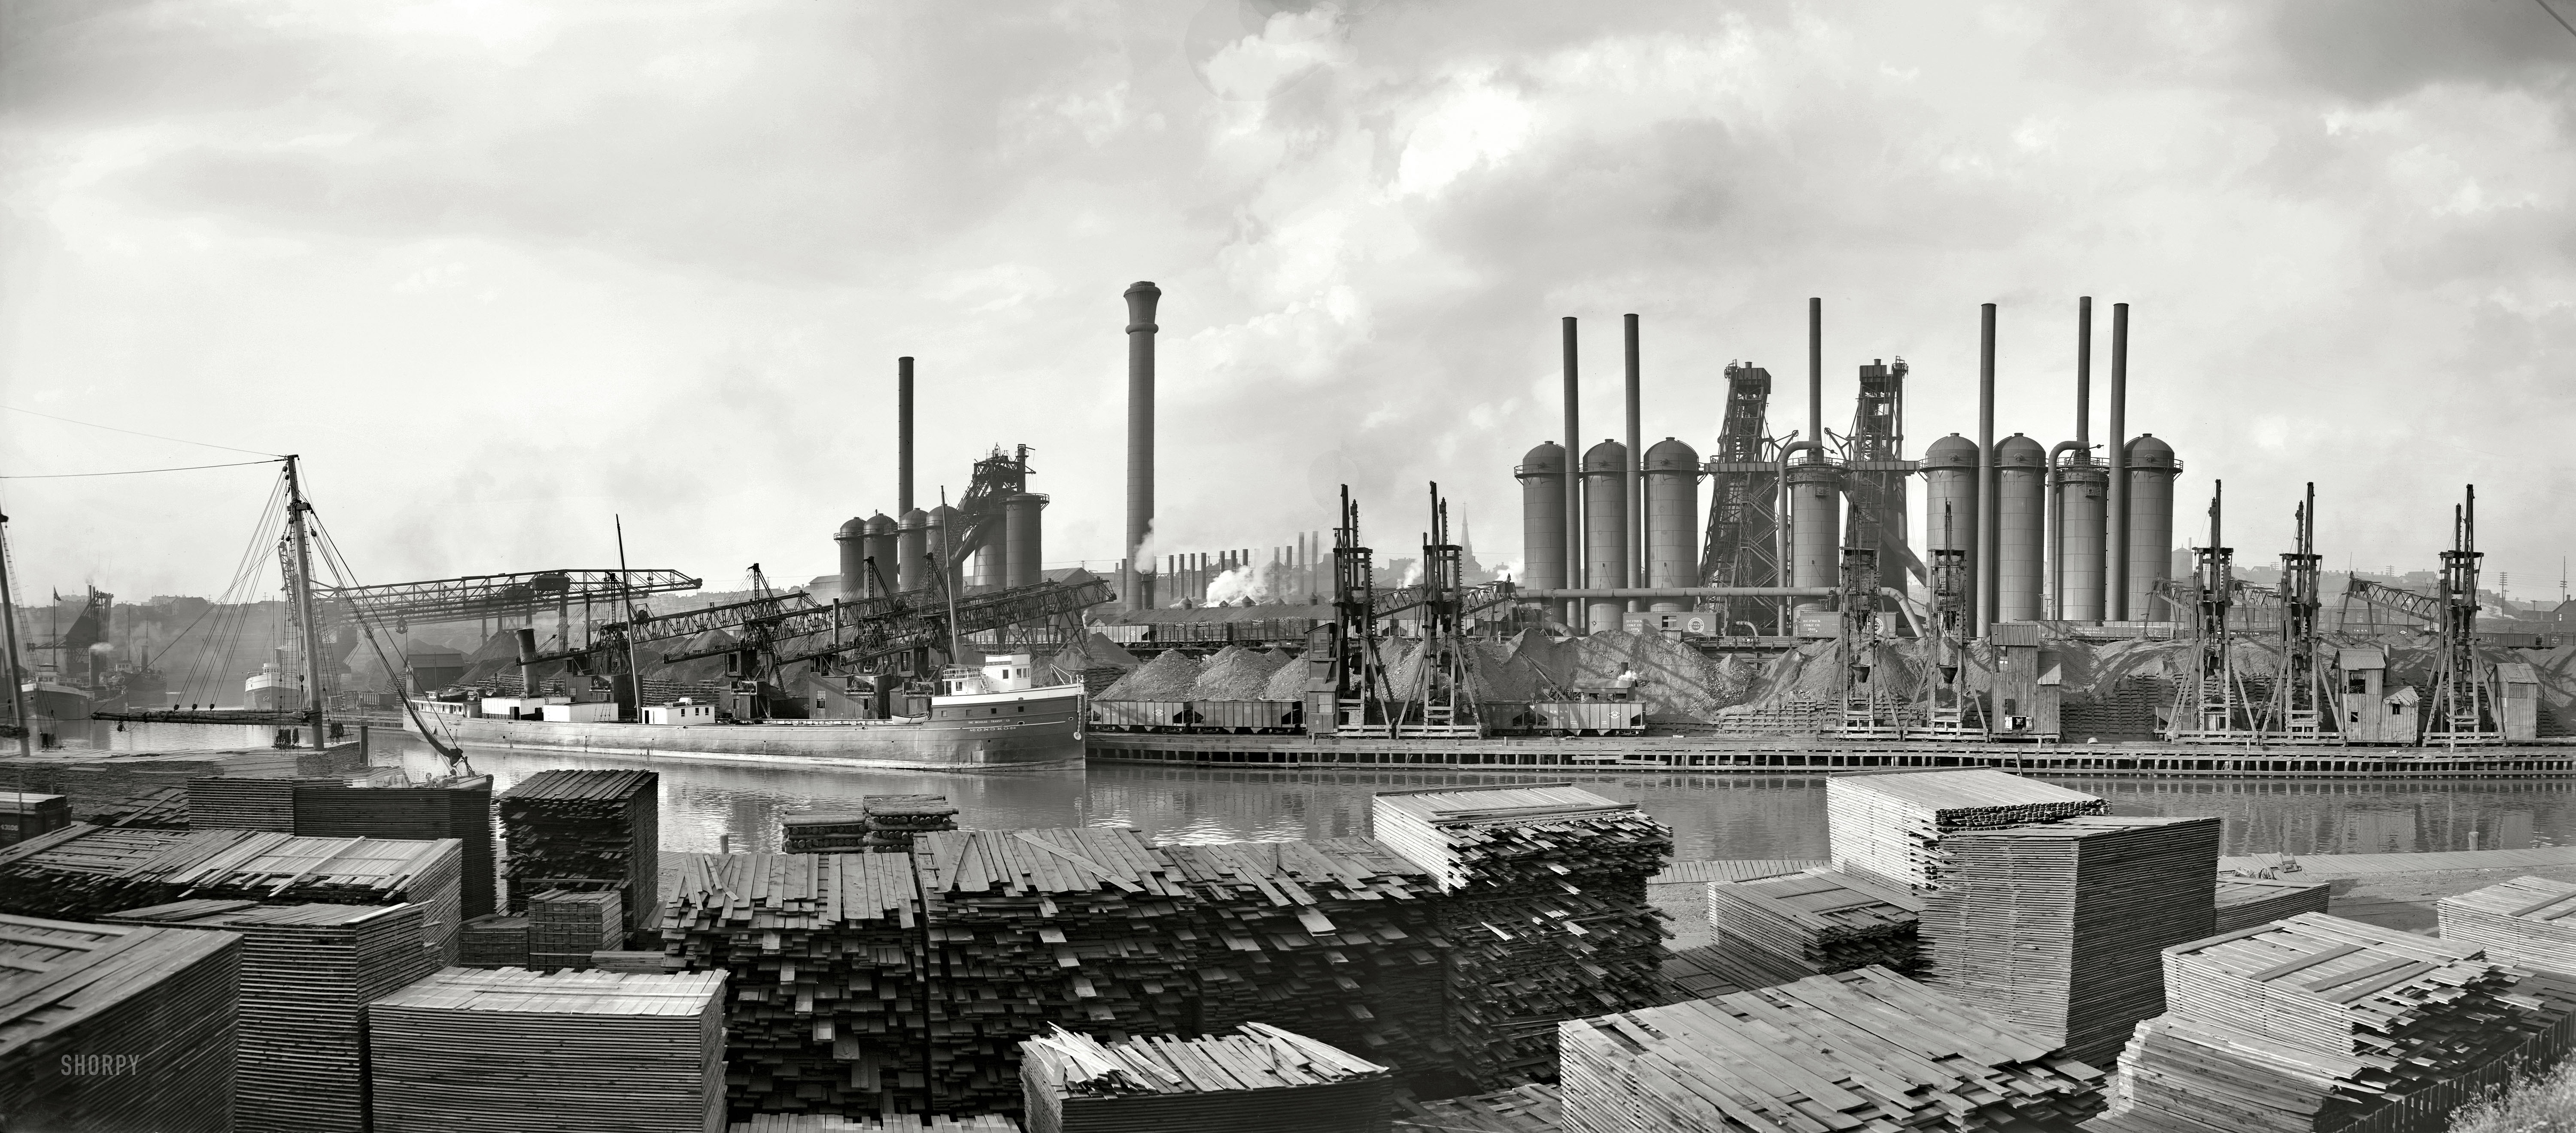 Cleveland, Ohio, circa 1910. "American Steel & Wire Co. plant." Your assignment: Create a diorama of this scene using toothpicks, cotton batting, string and cardboard. Panorama made from two 8x10 glass negatives. View full size.